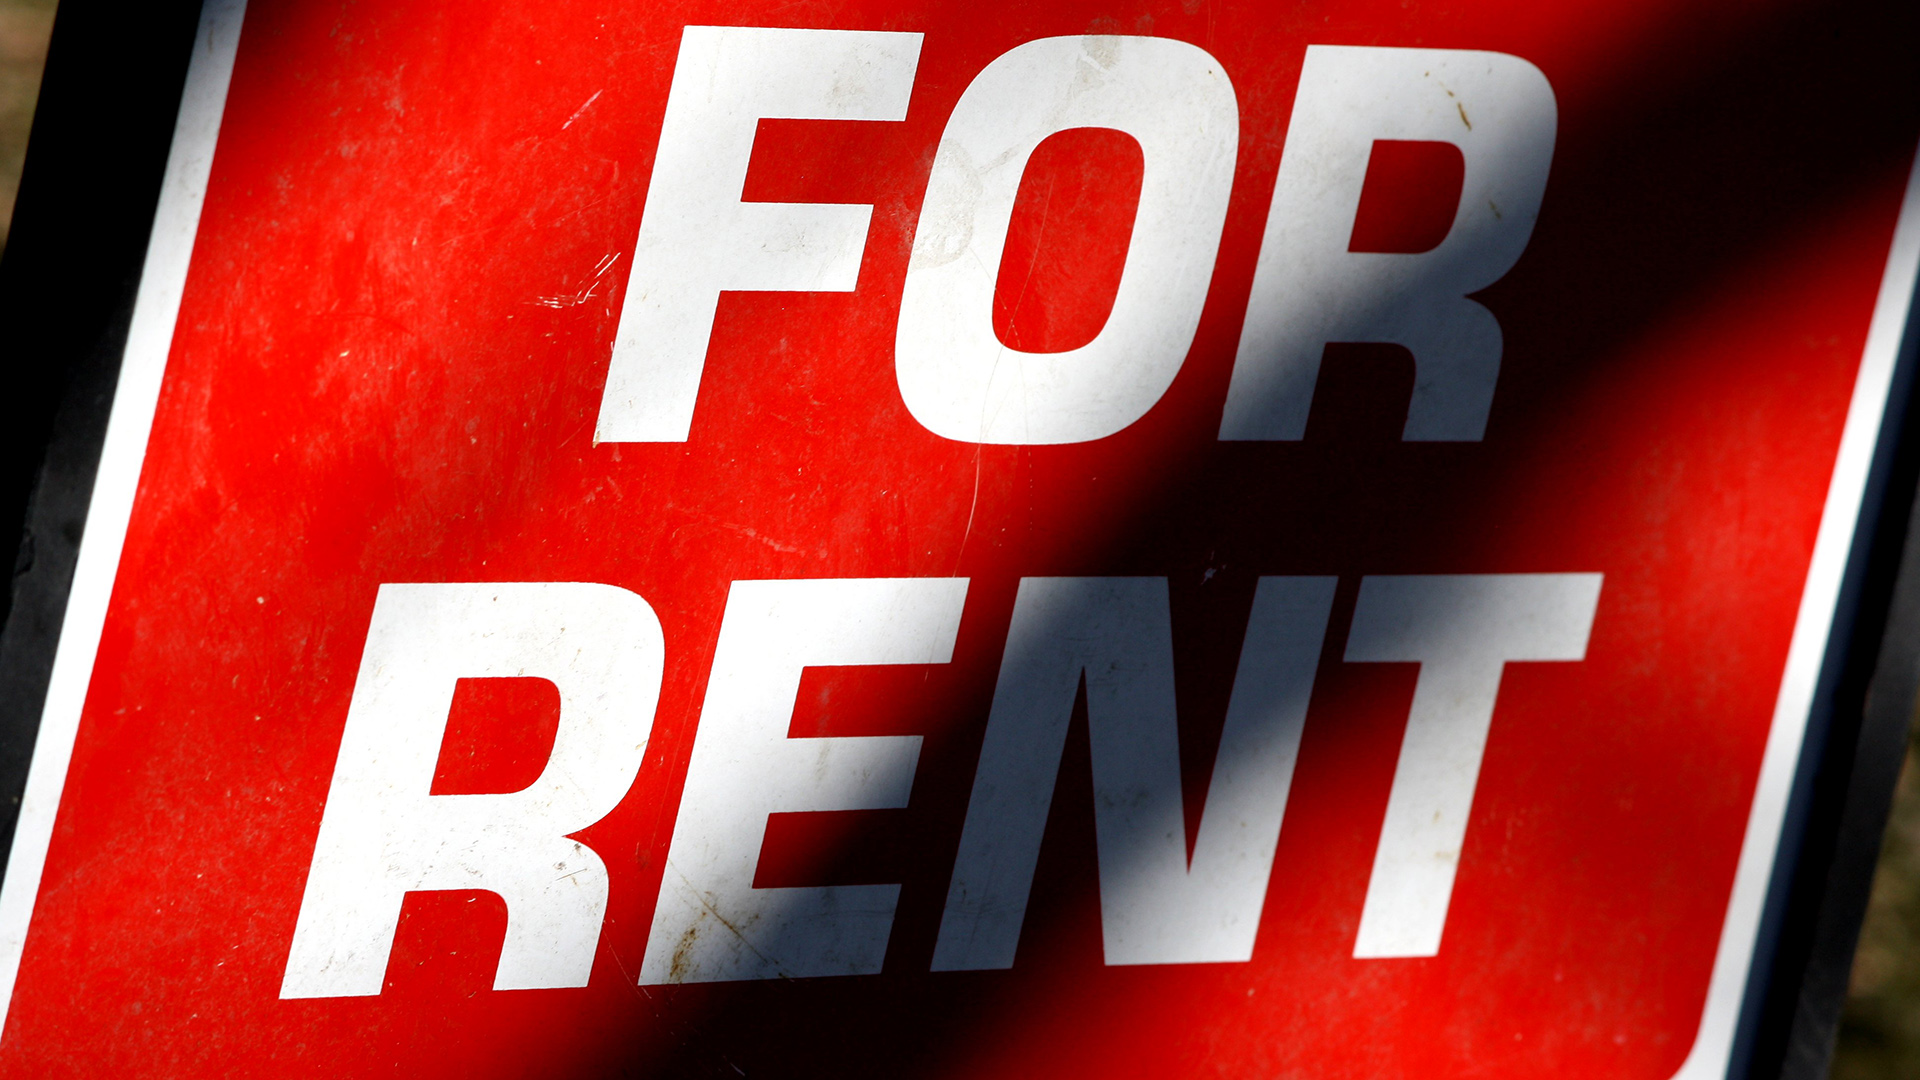 A "for rent" sign.